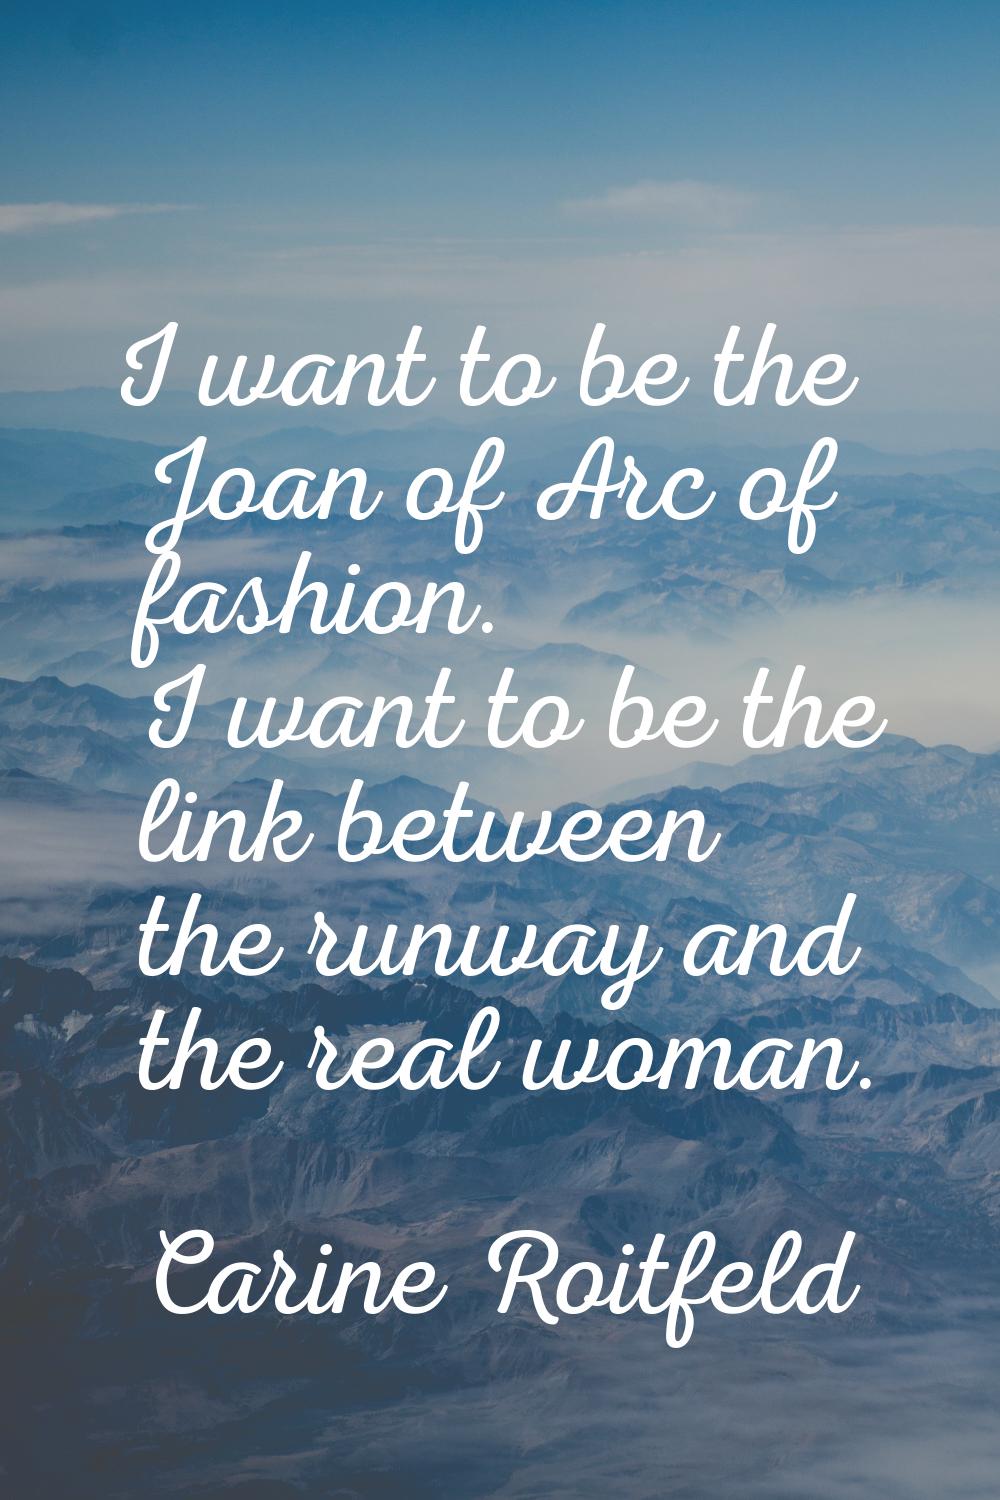 I want to be the Joan of Arc of fashion. I want to be the link between the runway and the real woma